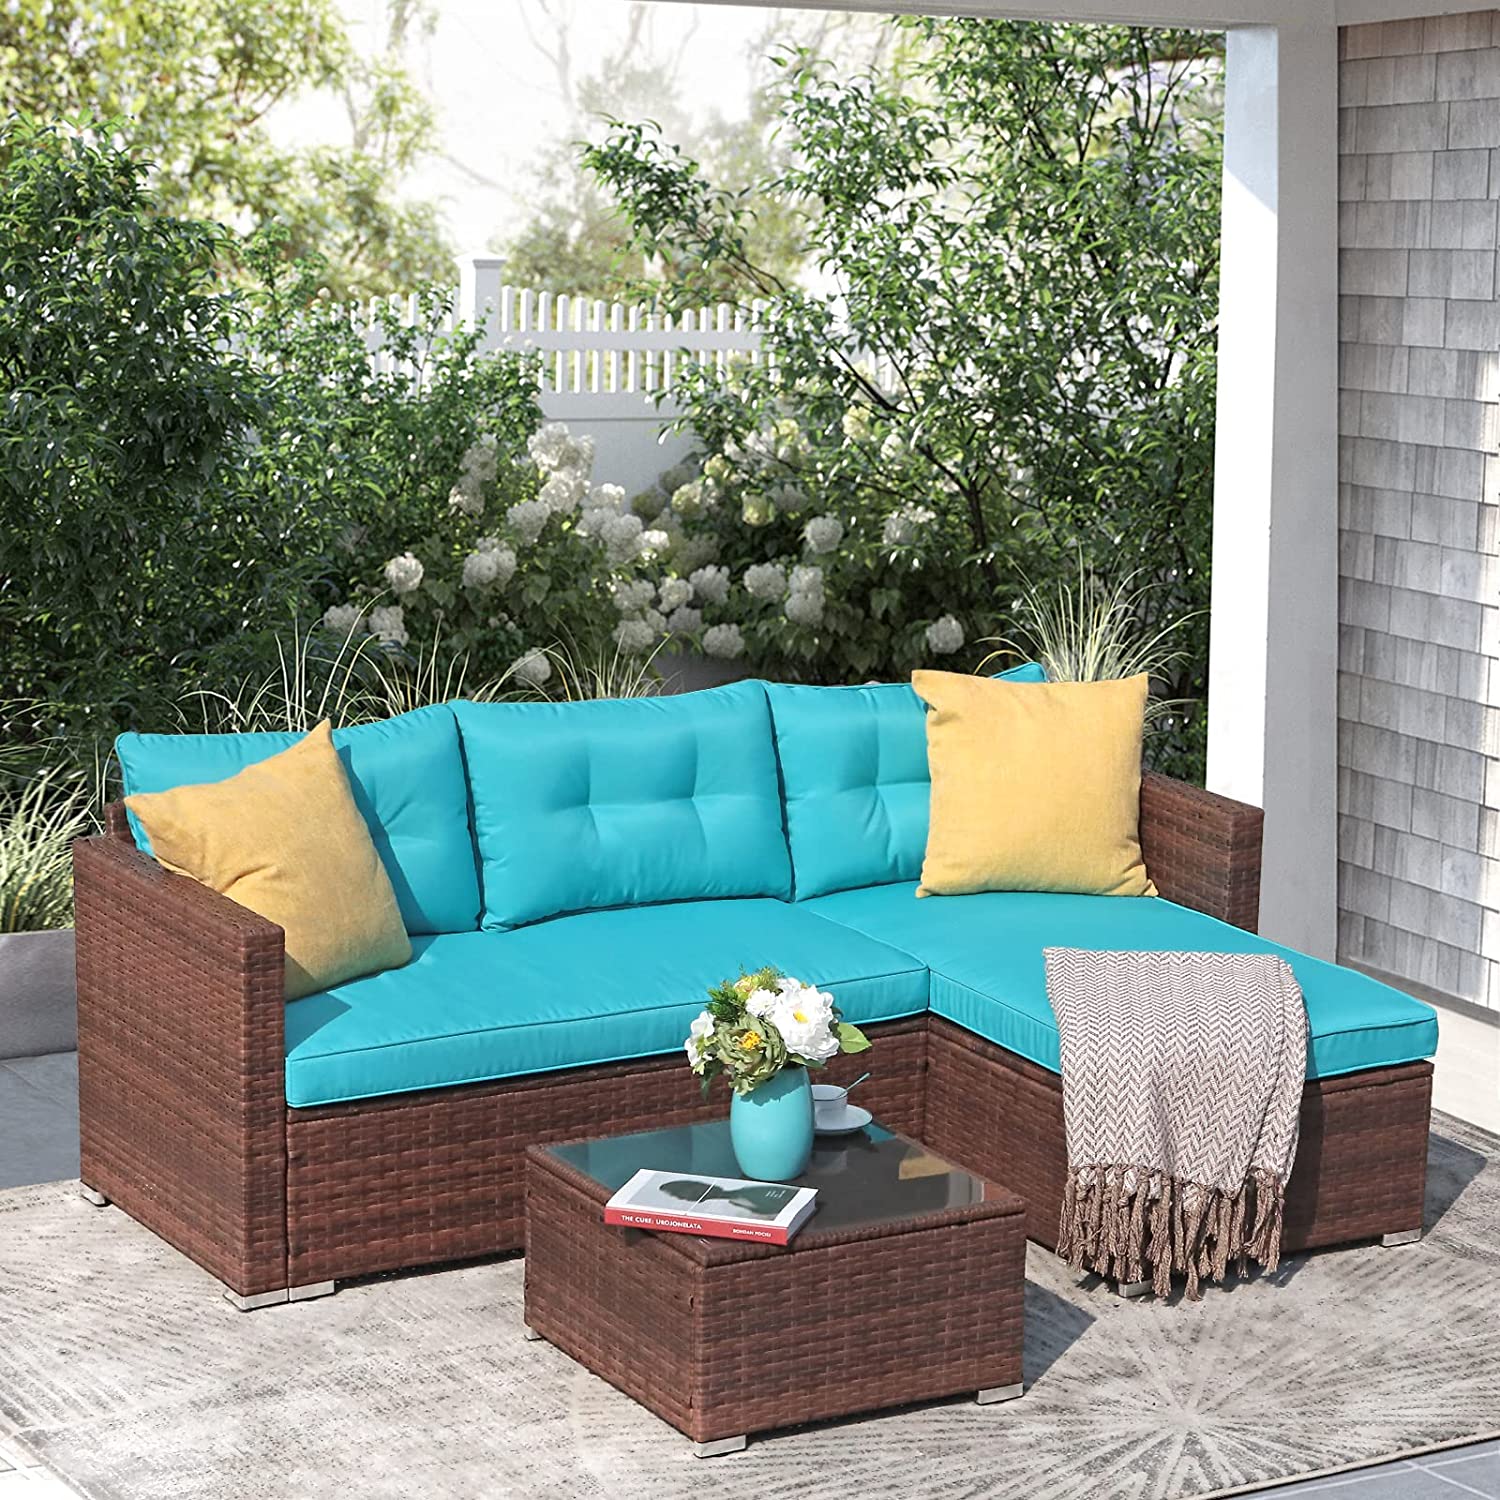 OC Orange-Casual 5-Piece Patio Furniture Set, All-Weather Outdoor Sectional Sofa, with Glass Coffee Table for Deck Balcony Porch, Brown Rattan & Turquoise Cushion - image 7 of 8